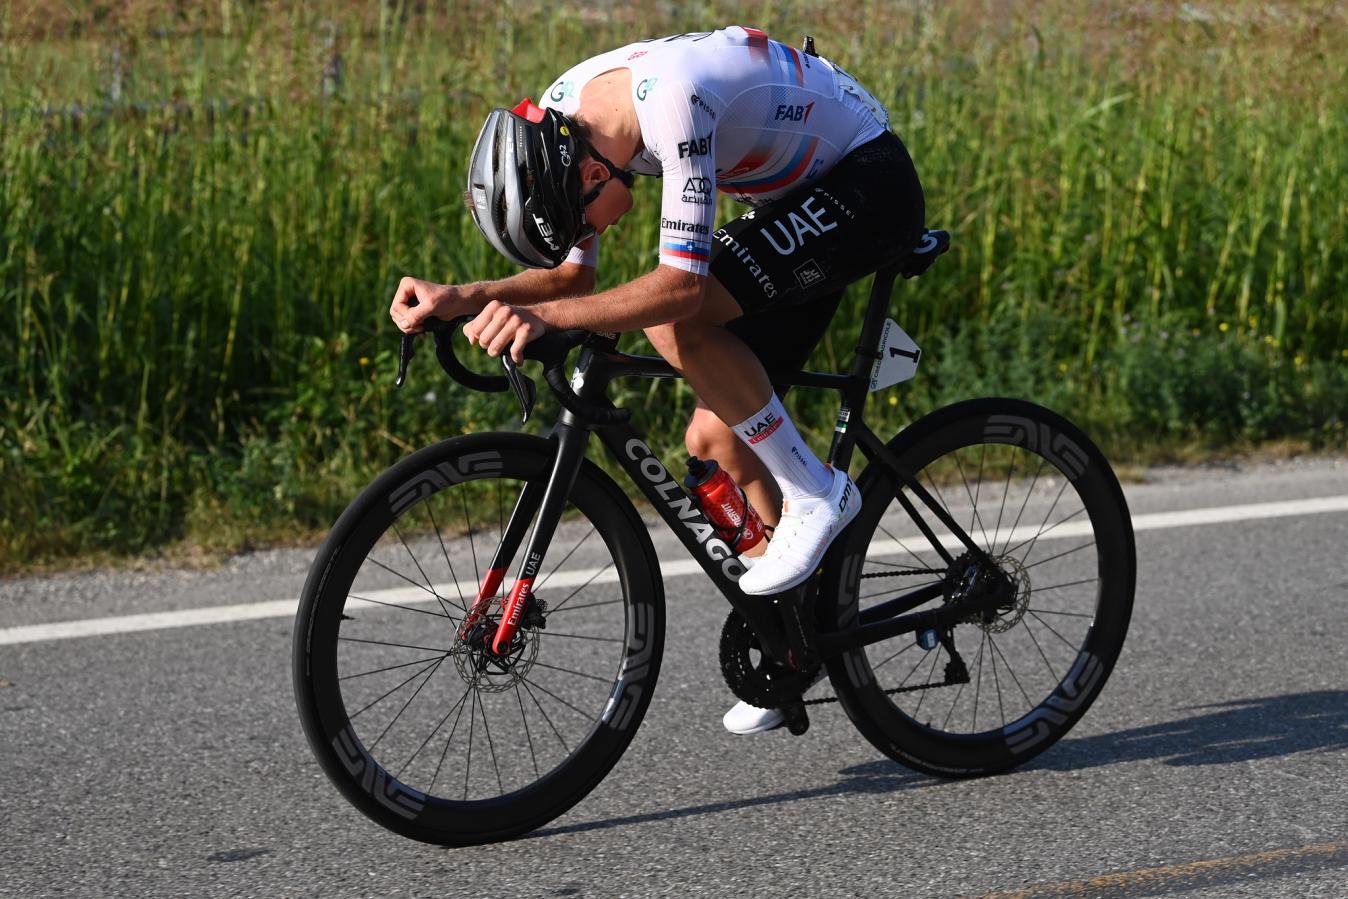 Best men's WorldTour bikes of 2023: Which brand won the most races? | GCN